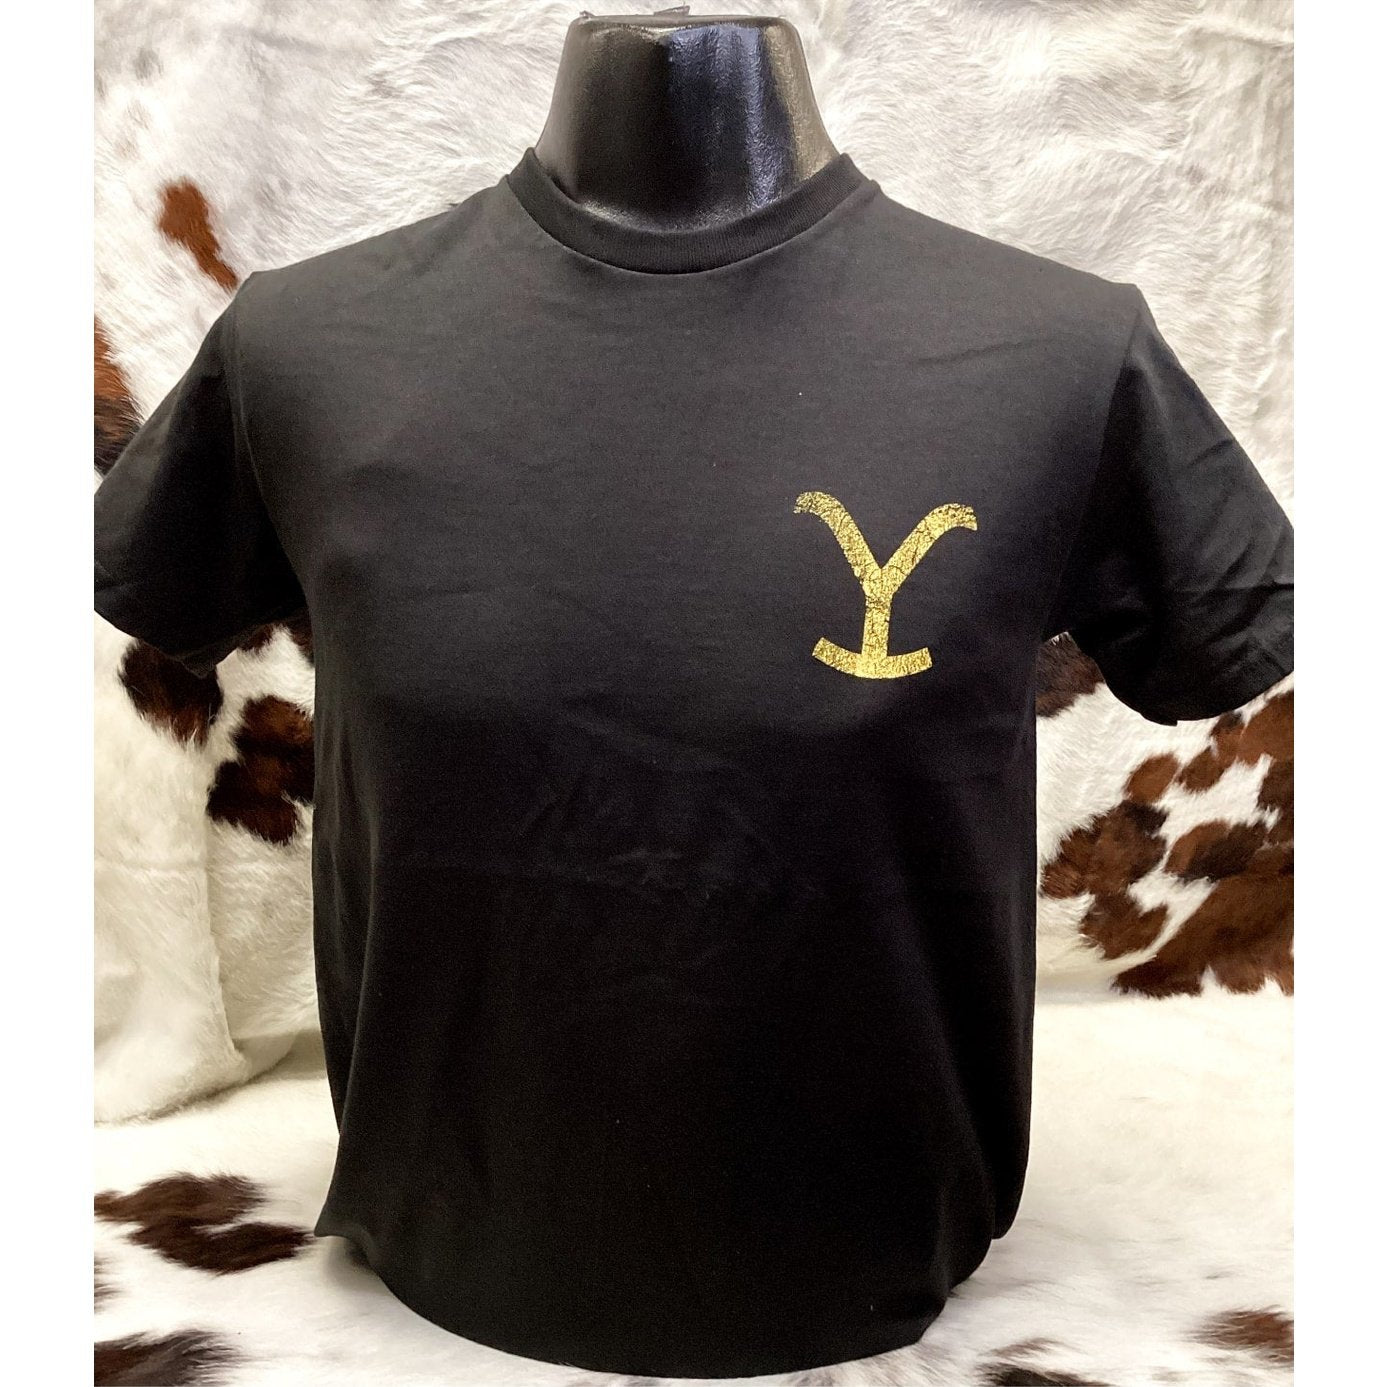 Changes Licensed Yellowstone Men’s T-Shirt Rider Silhouette 66-335-88 - Changes Licensed Apparel